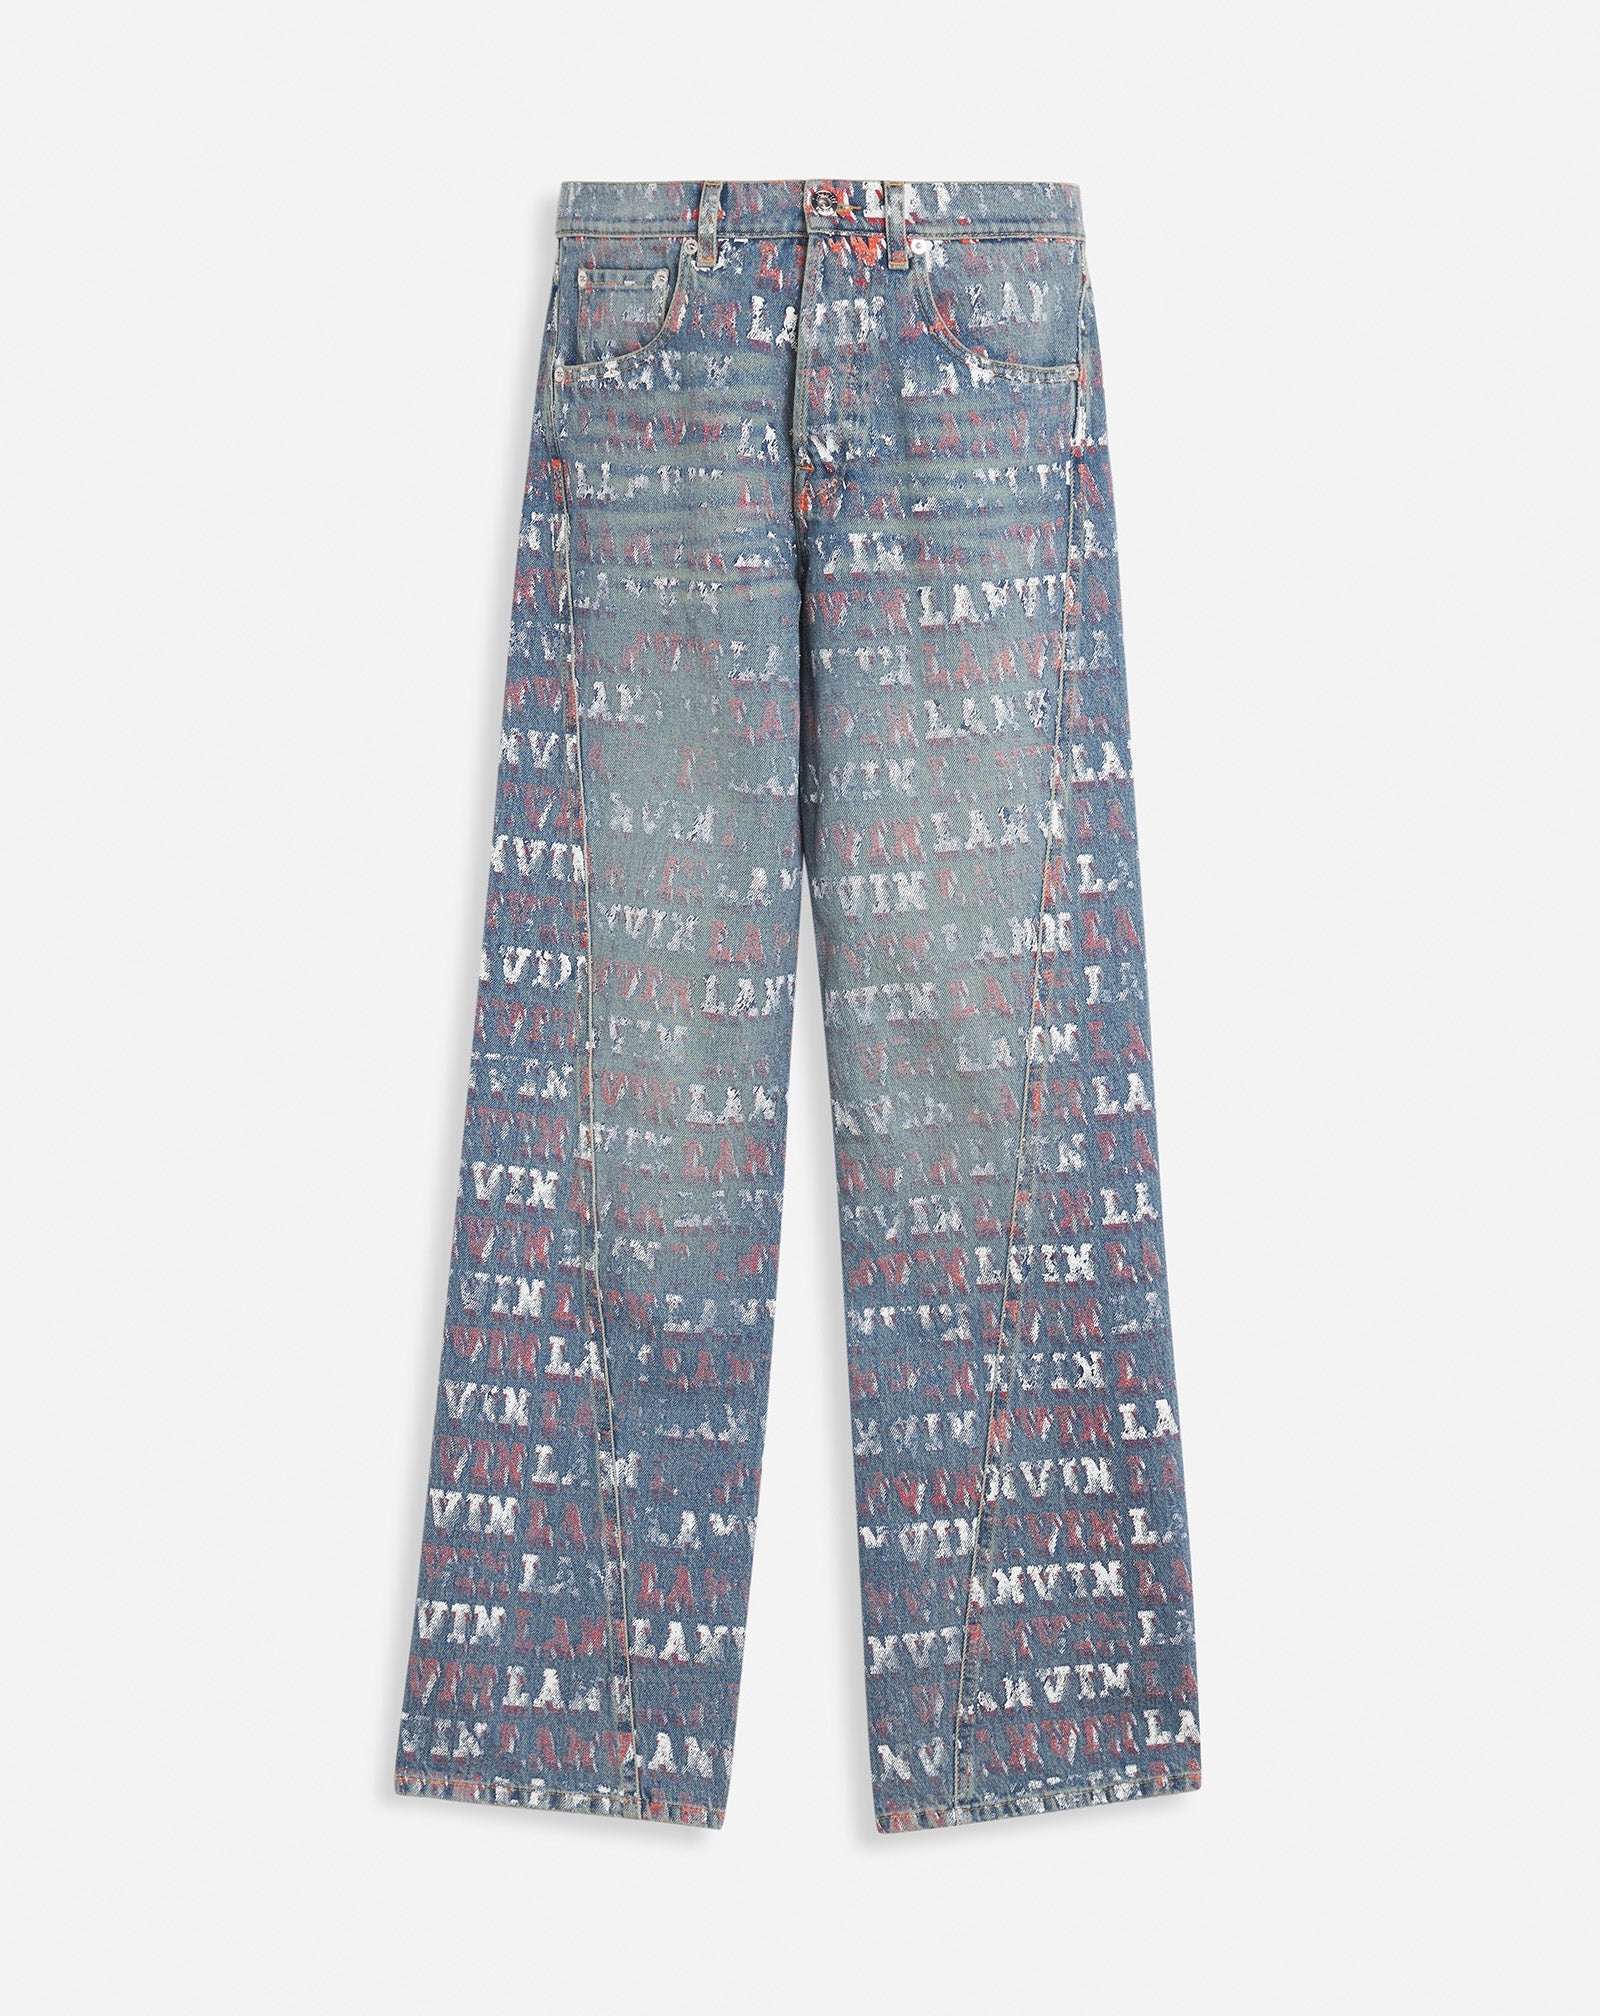 LANVIN X FUTURE STRAIGHT FIT PRINTED PANTS FOR MEN - 1